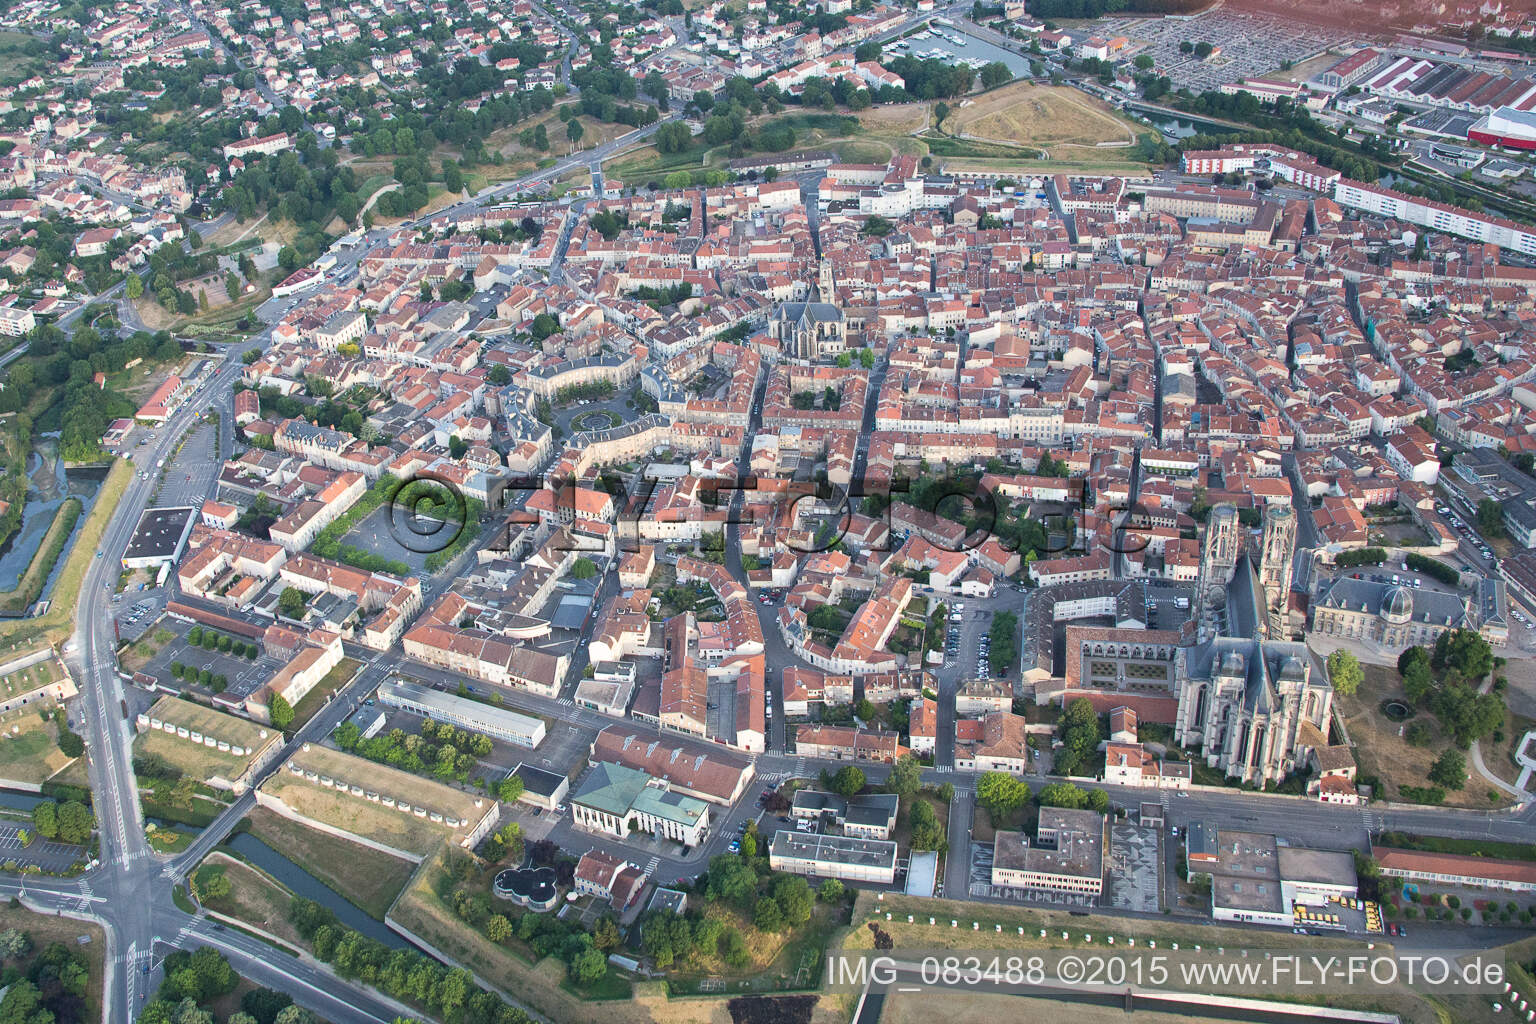 Drone image of Toul in the state Meurthe et Moselle, France